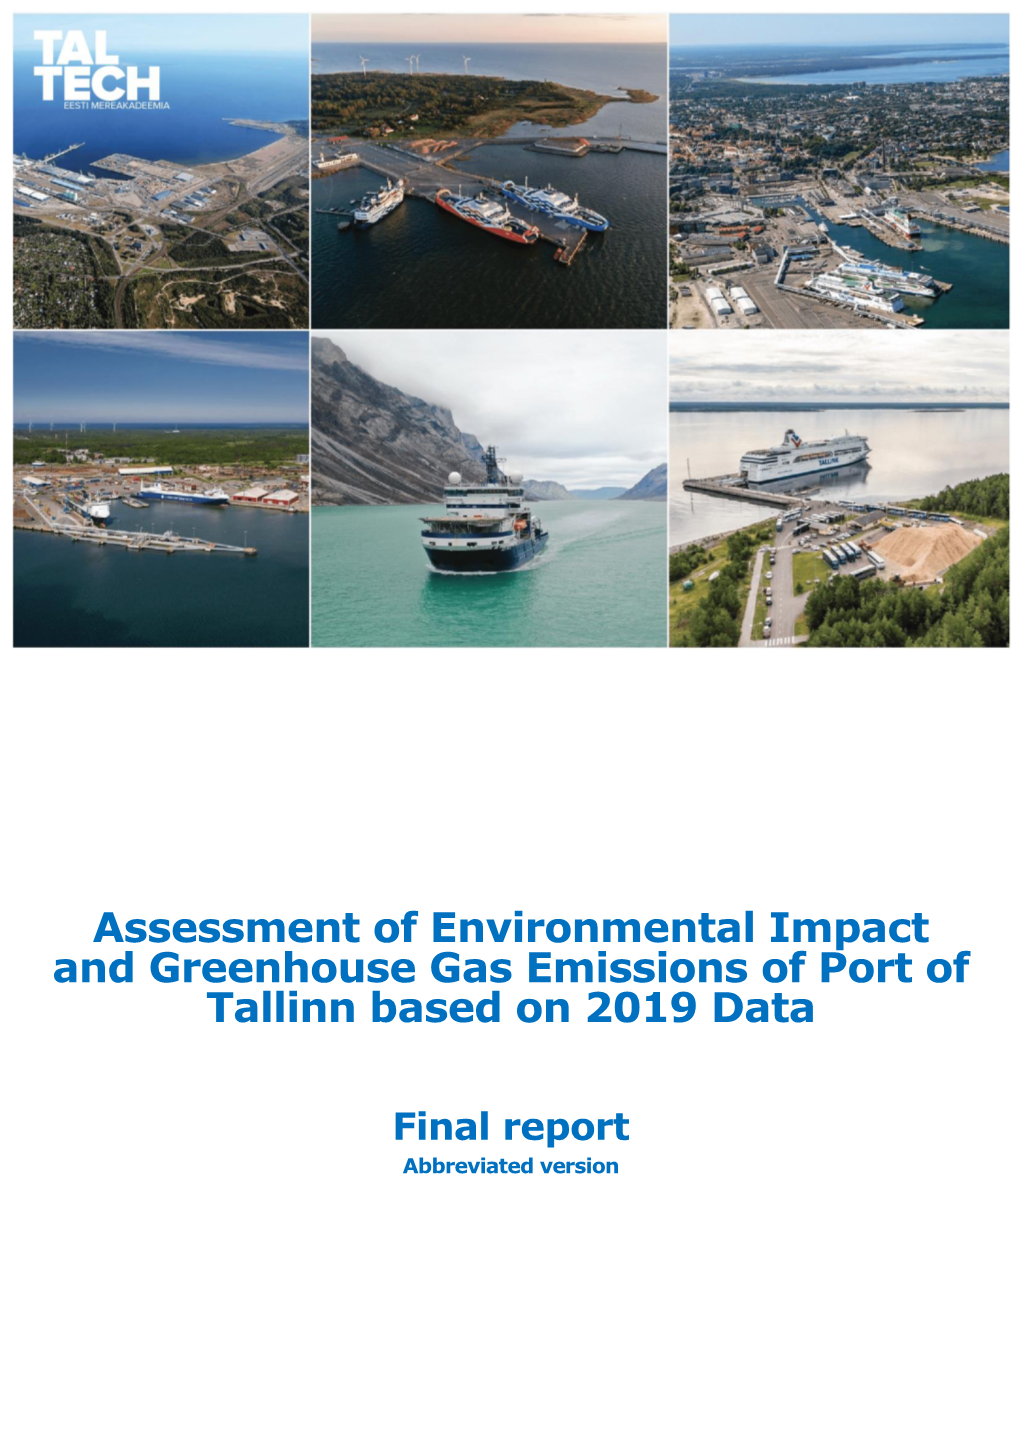 Assessment of Environmental Impact and Greenhouse Gas Emissions of Port of Tallinn Based on 2019 Data